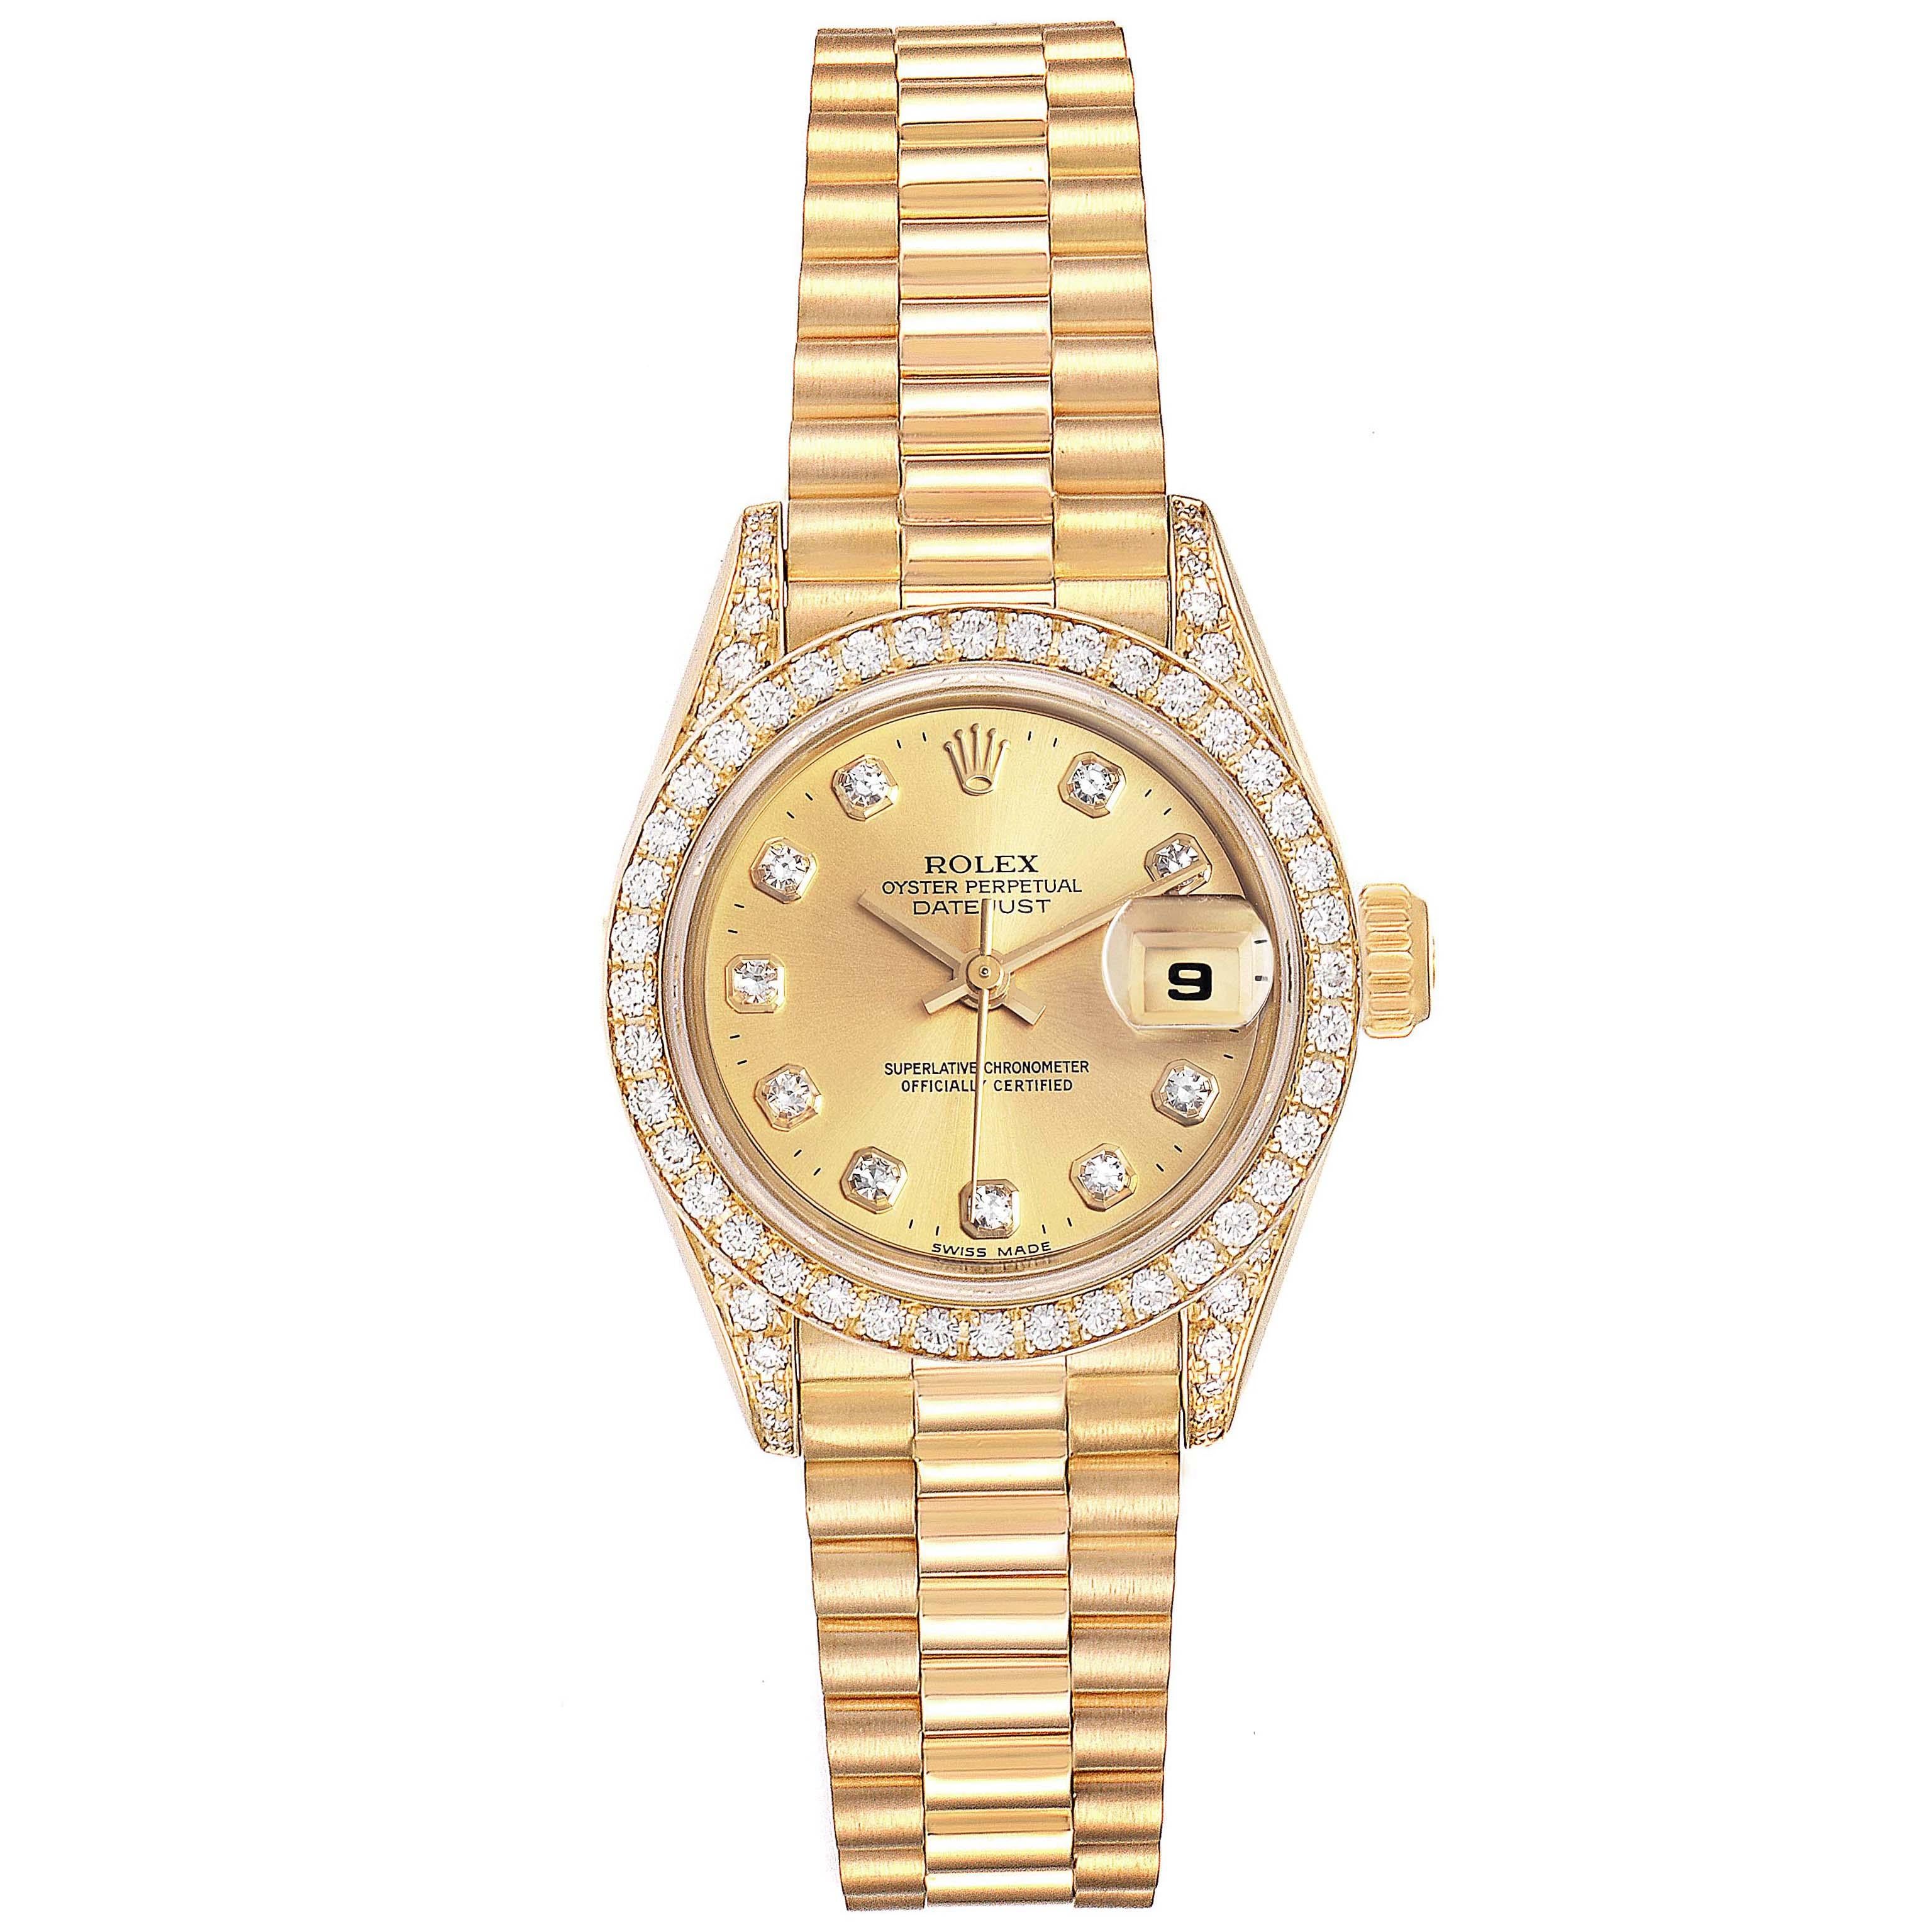 Rolex President Datejust 26mm Yellow Gold Diamond Ladies Watch 69158. Officially certified chronometer self-winding movement. 18k yellow gold oyster case 26.0 mm in diameter. Rolex logo on a crown. Original Rolex factory diamond lugs. Original Rolex